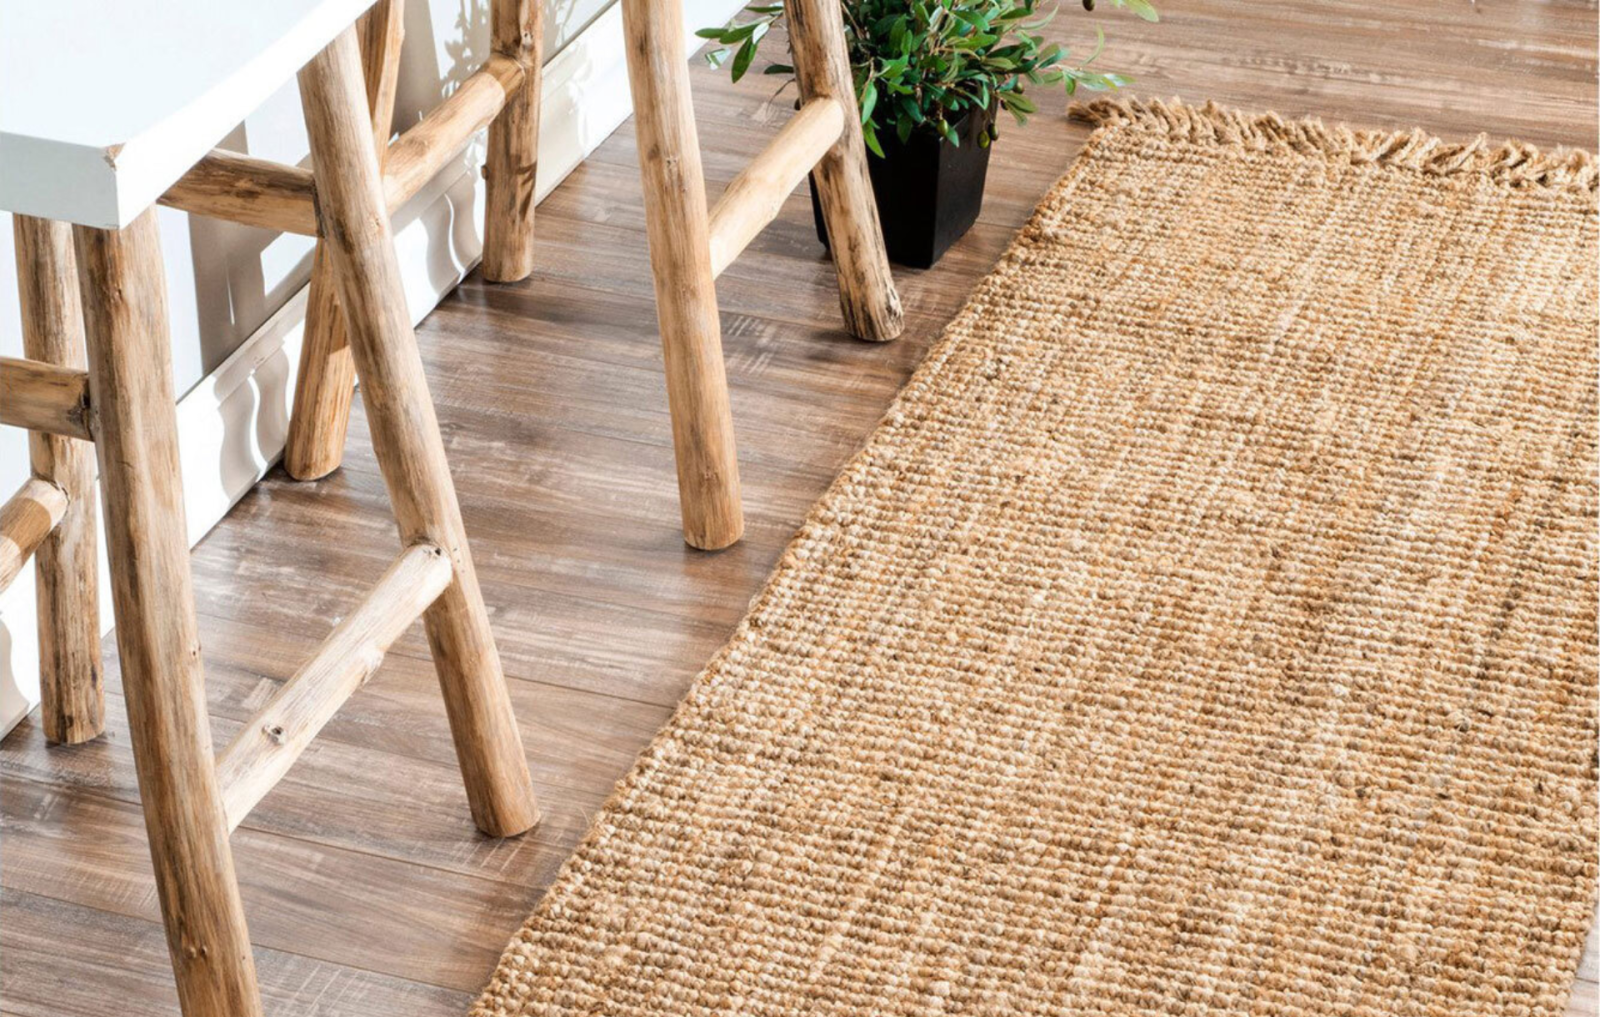 Are Jute Rugs Good for Kitchens?